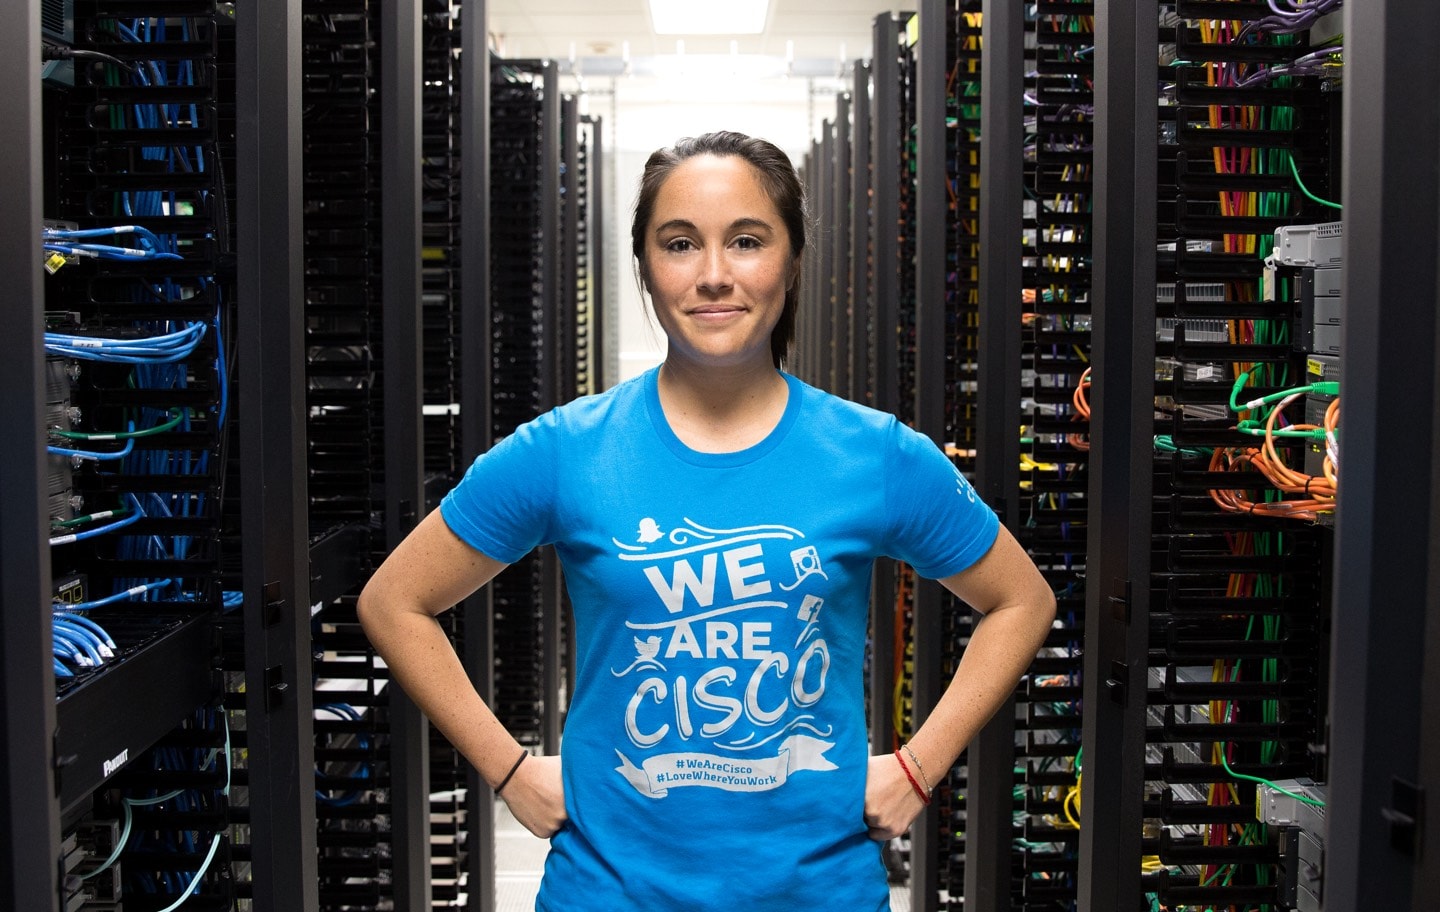 Cisco 350-901 Practice Questions: Overcome Your Challenges